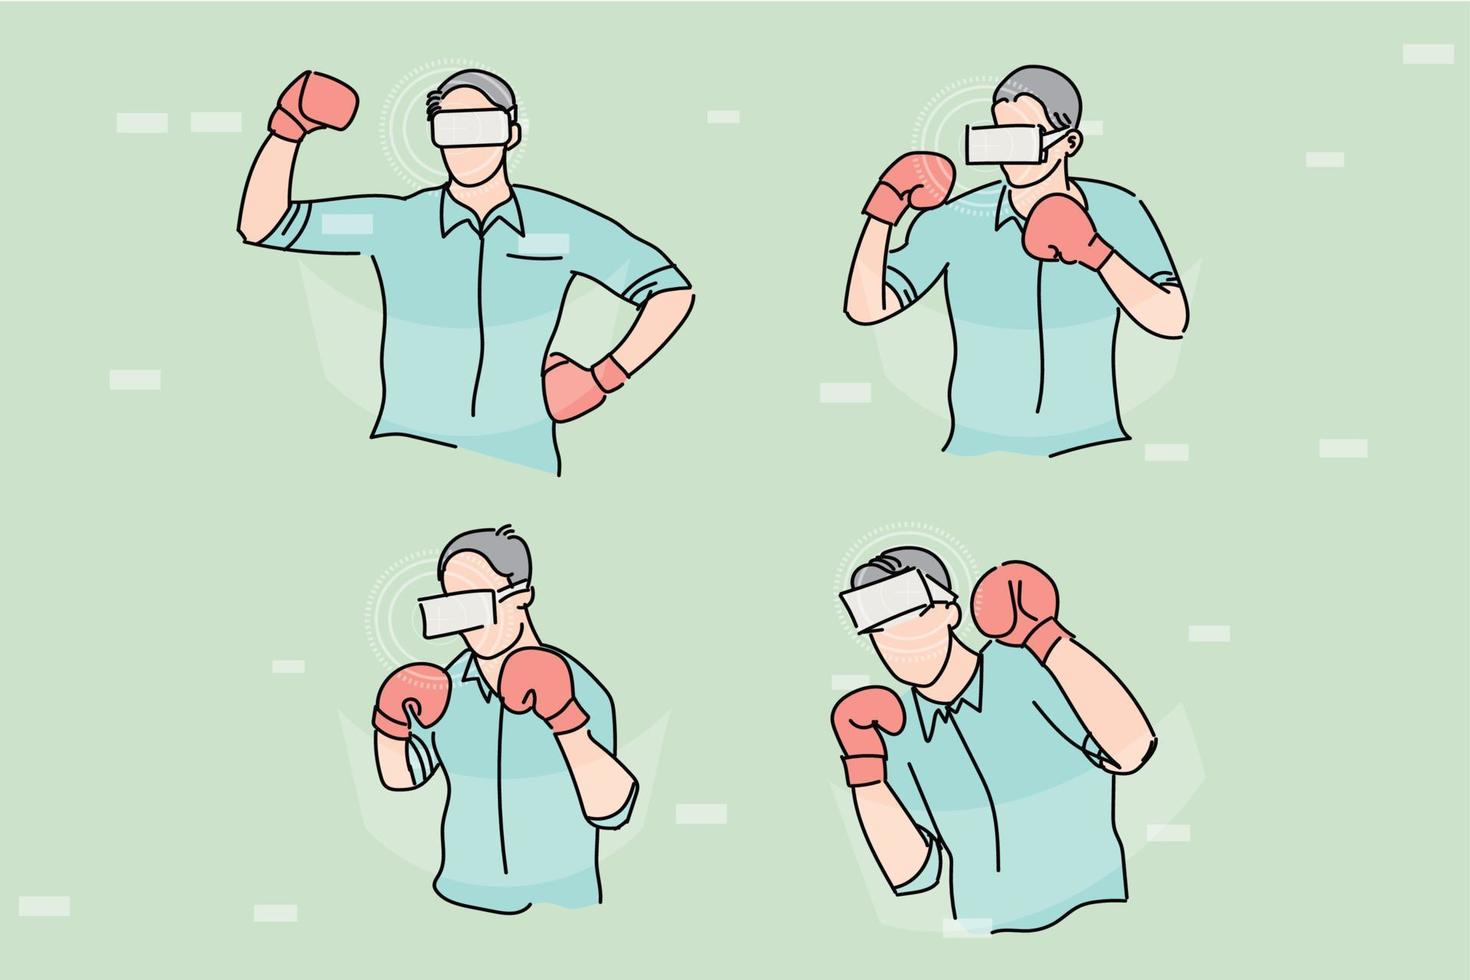 Man playing sport in virtual reality. Boxing in game. Flat design illustration vector